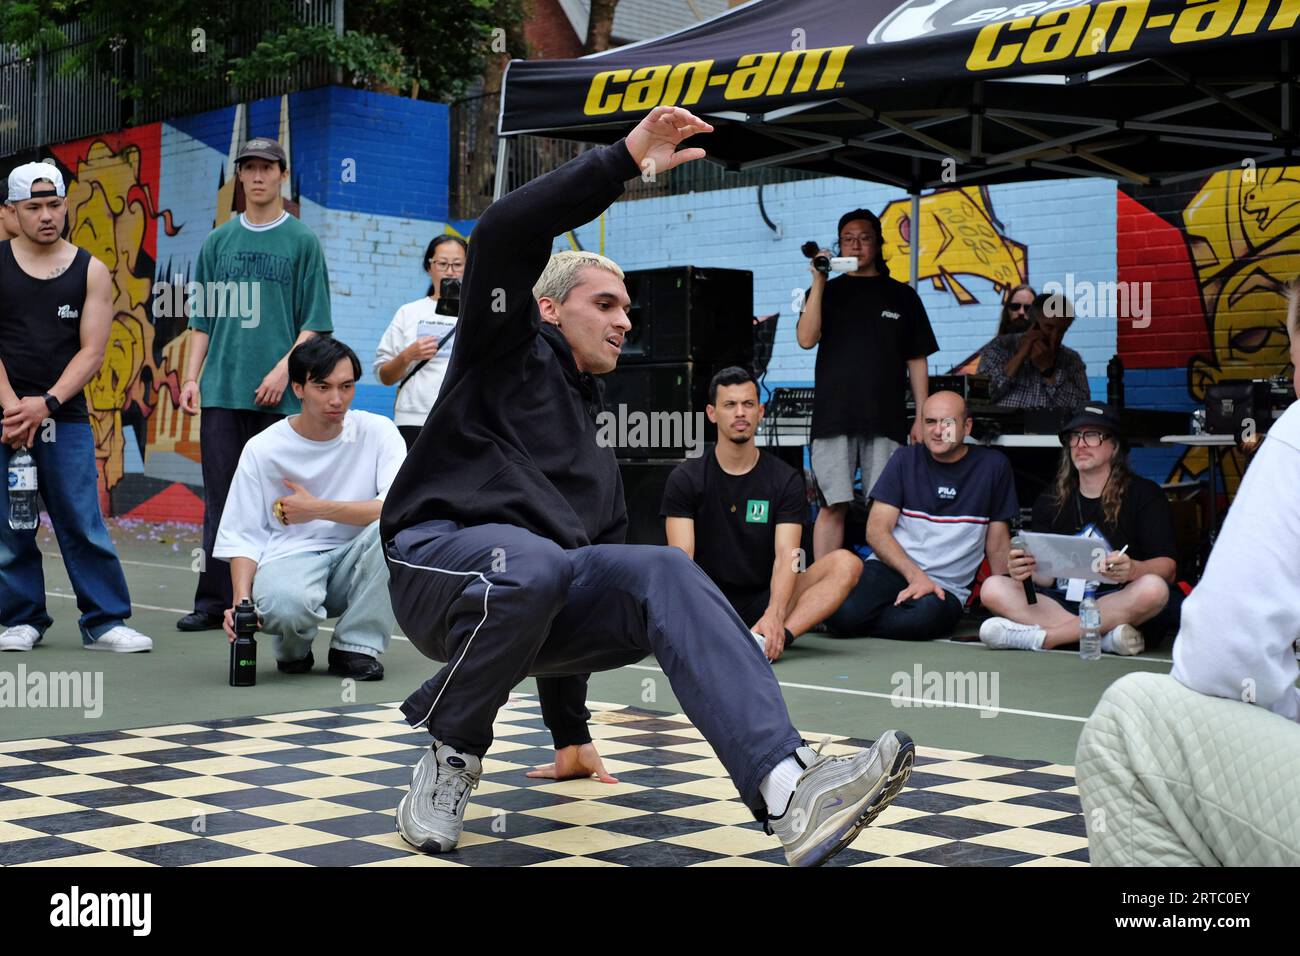 Bboy Downrock steppin' - Breakdancing footwork performance, competition and battles on the basketball courts of  Woolloomooloo, Sydney Stock Photo